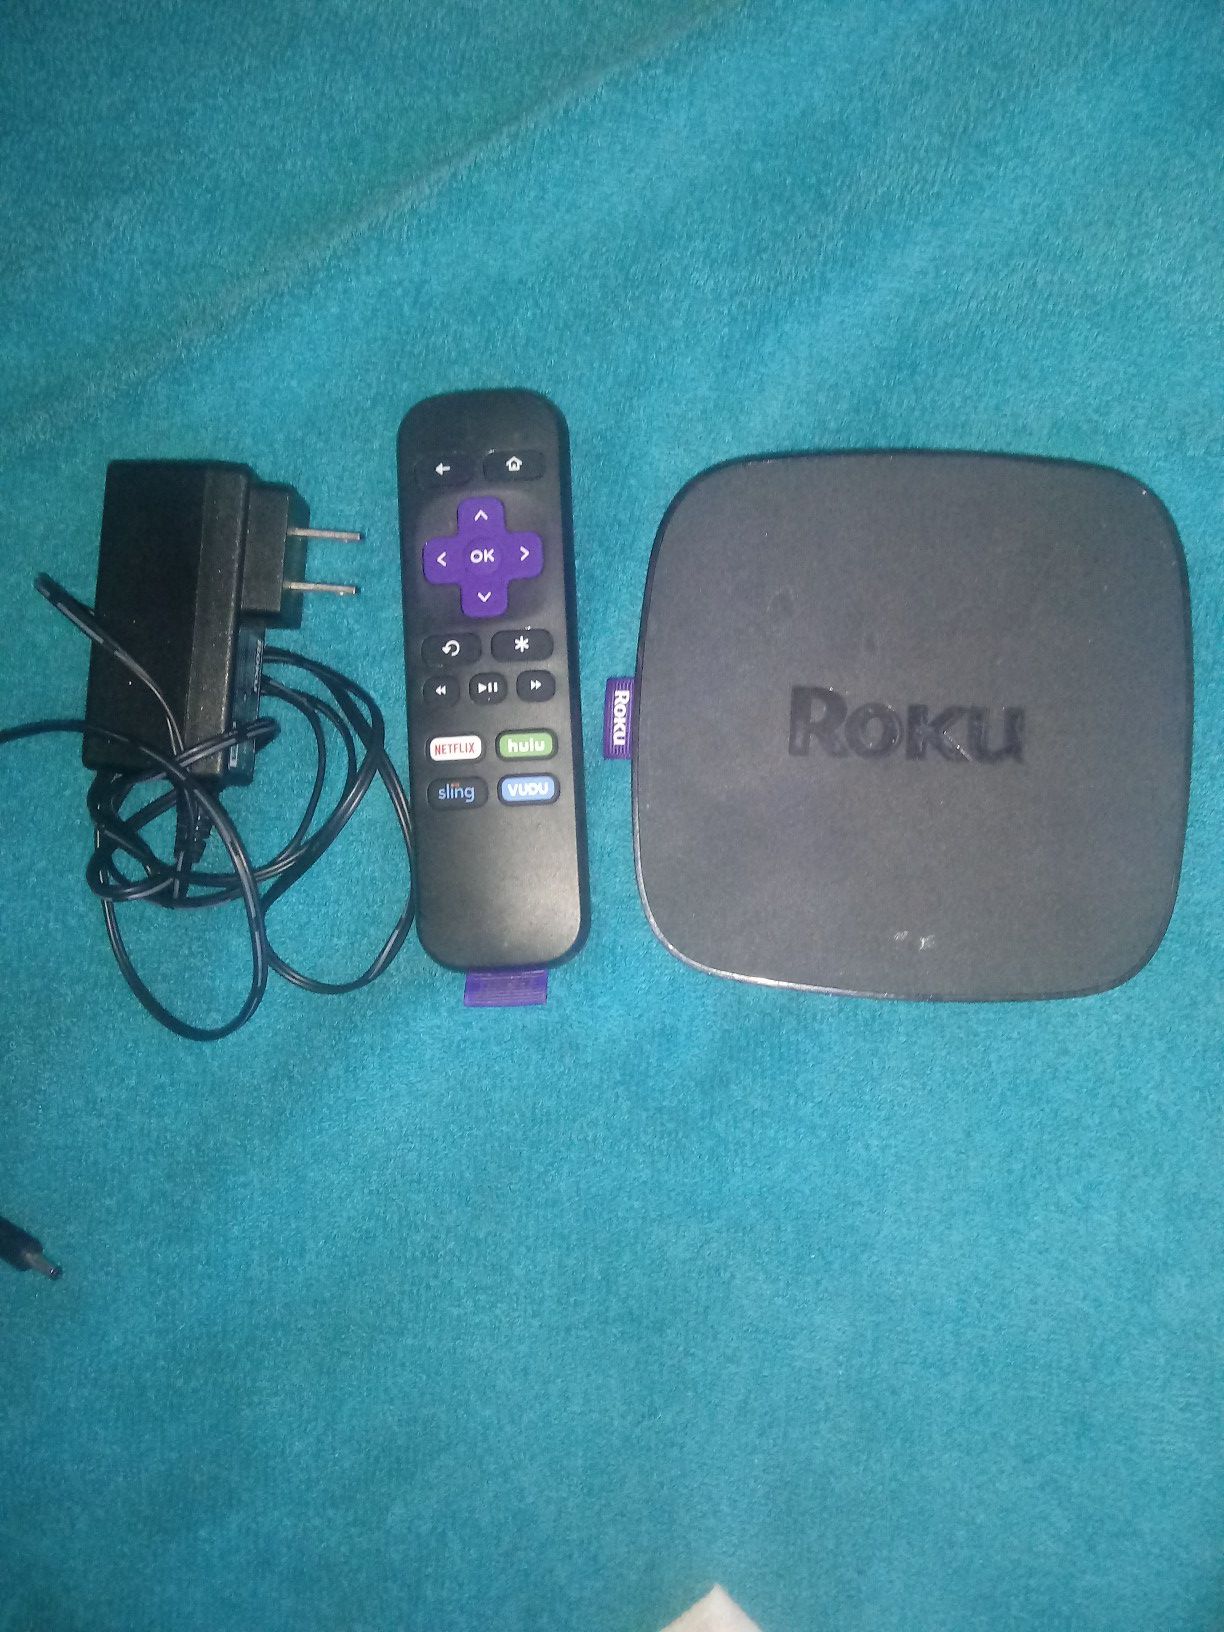 Roku Box Premiere HD And 4K UHD With Charger And Controller!!!Works Perfect And Sony Smart Wi-fi Blu-Ray Disc Player With Charger And Controller $50